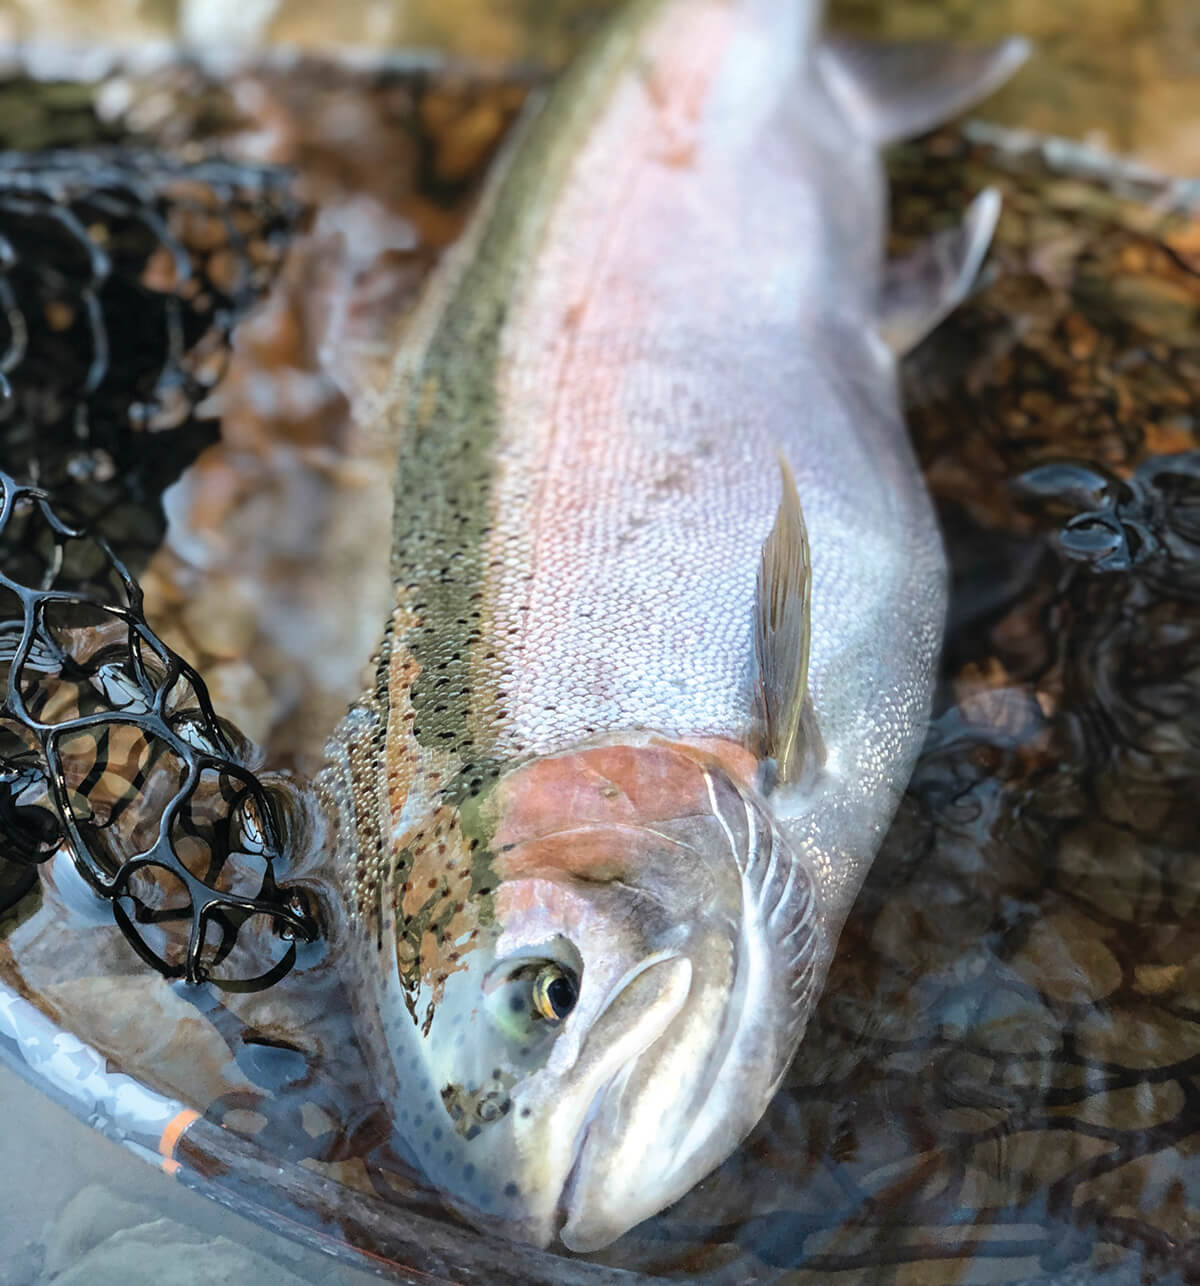 Where Have All the Steelhead Gone? - Fly Fisherman